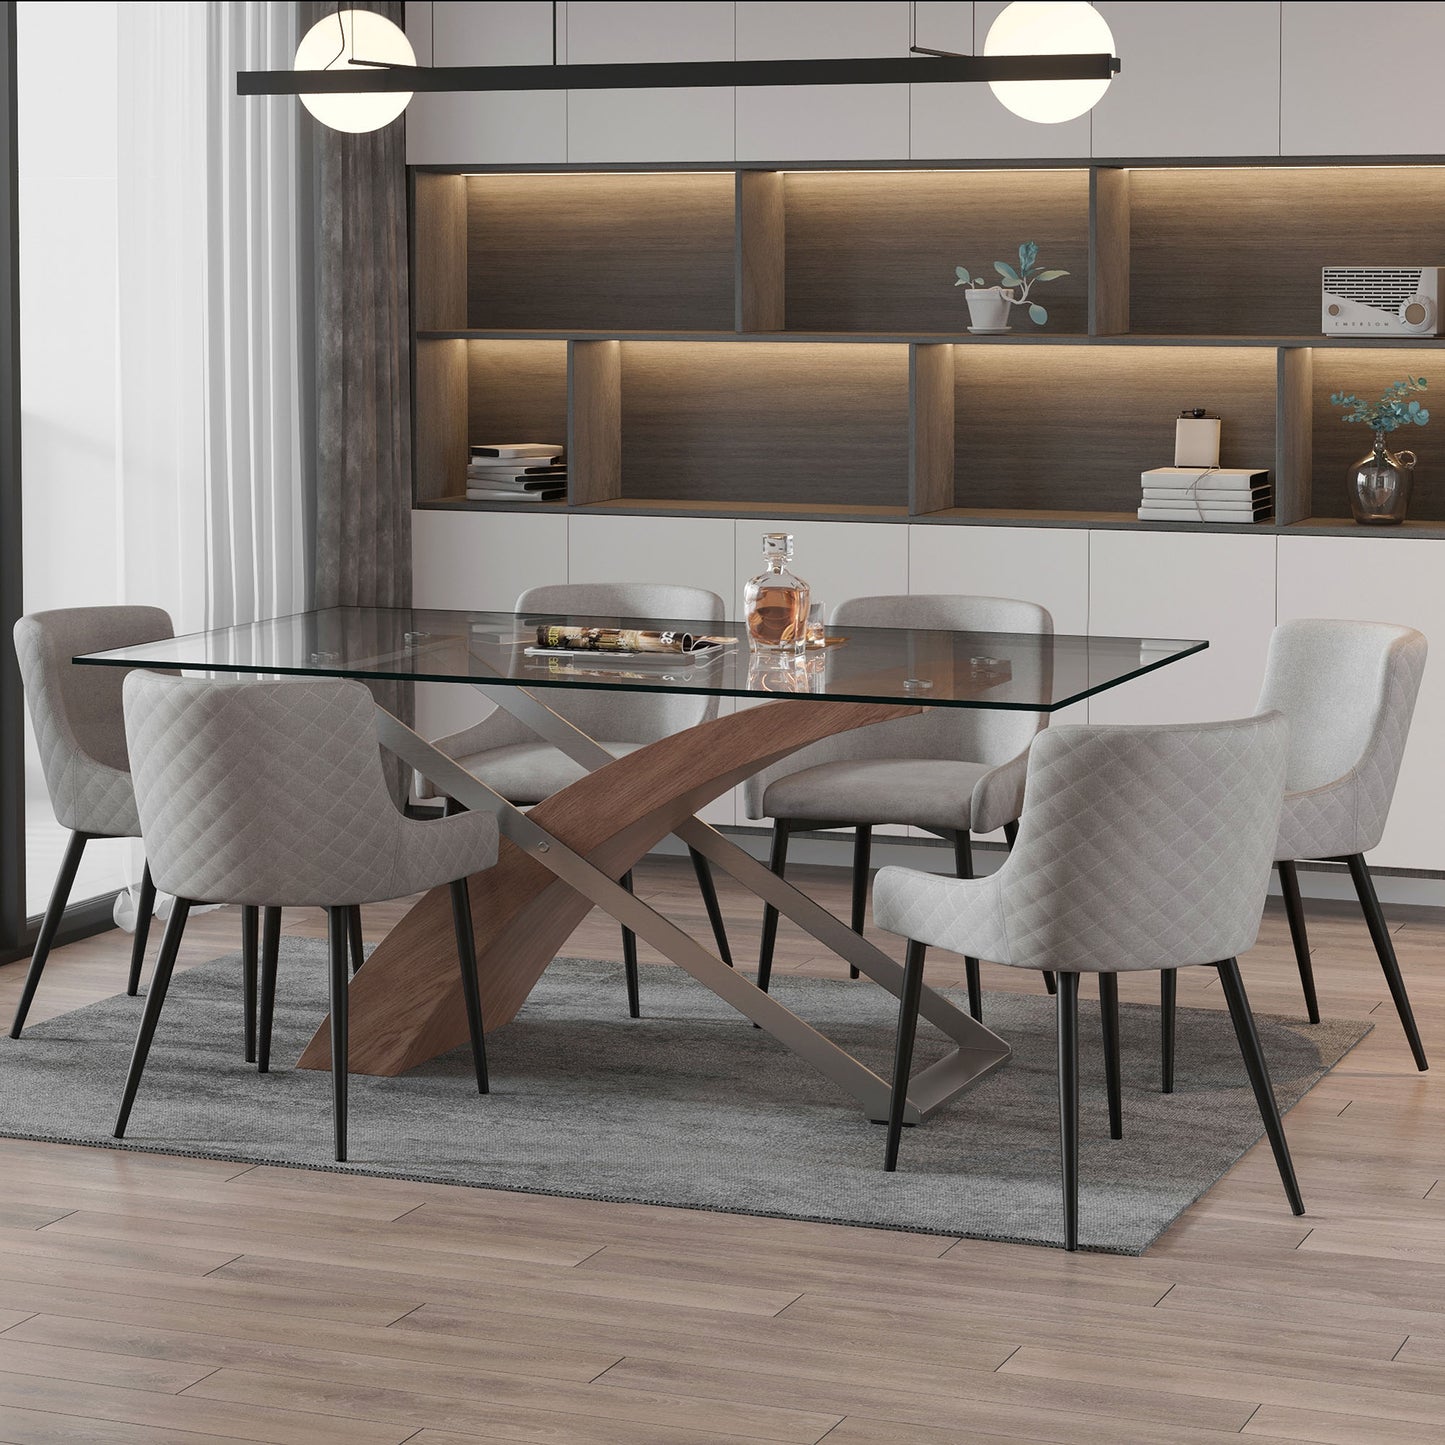 Veneta/Bianca Dining Set in Walnut with Black & Grey Chair (Table + 6 Chairs)